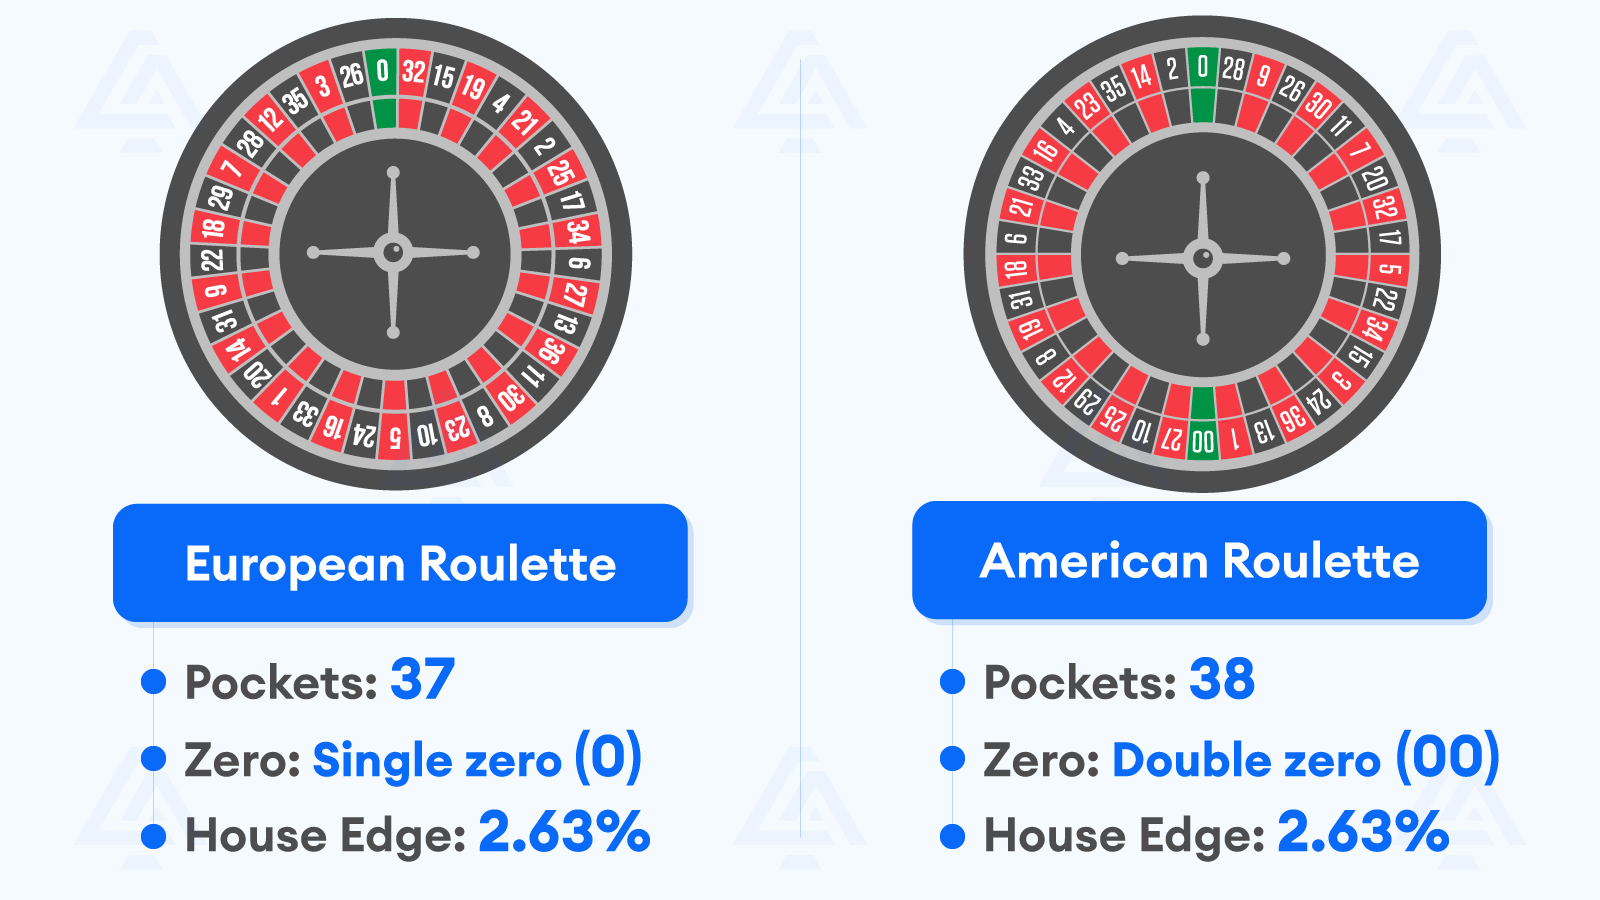 Key Differences between American and European Roulette